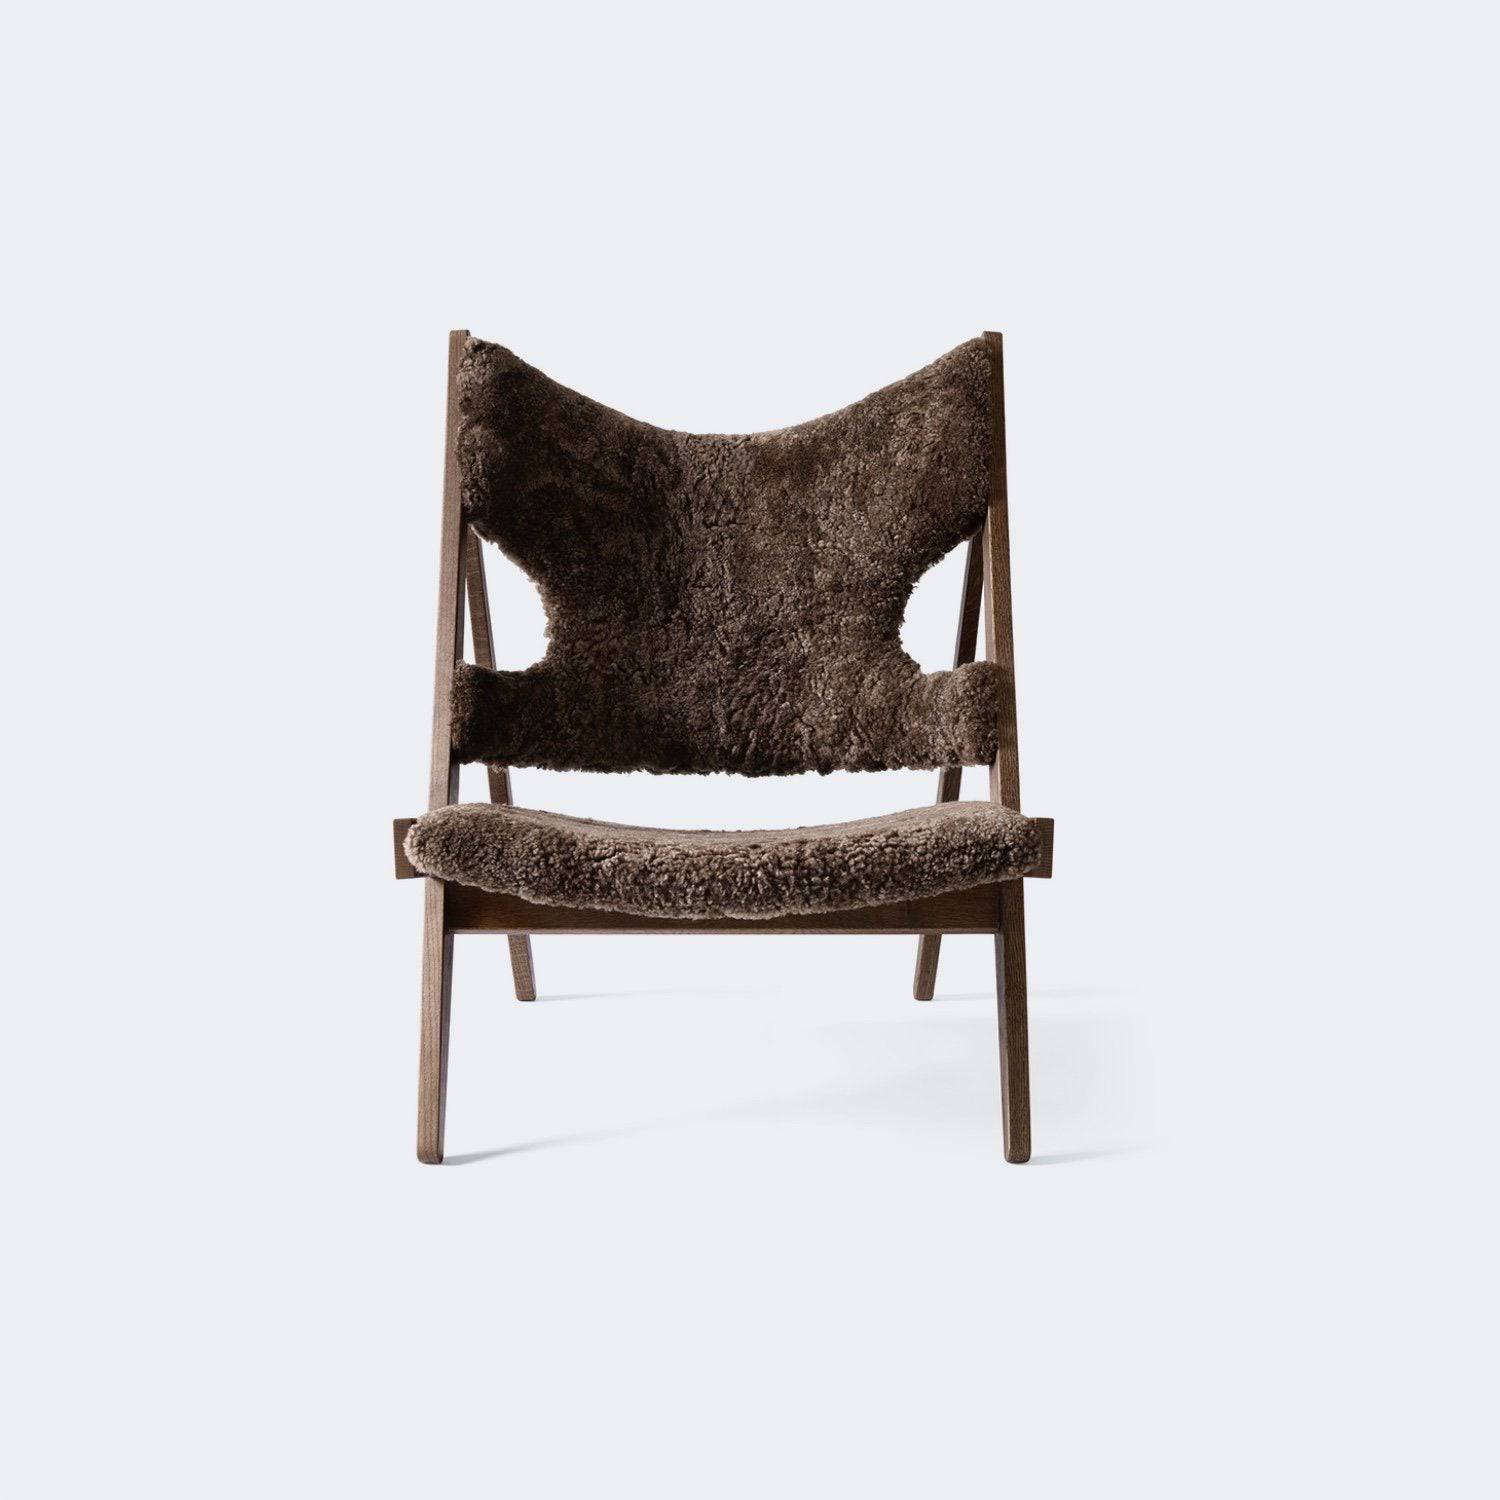 Audo Copenhagen Knitting Chair, Sheepskin Upholstery Made To Order Dark Stained Oak/Root, (Dark Brown) - KANSO#Frame/Fabric Color_Dark Stained Oak/Root, (Dark Brown)